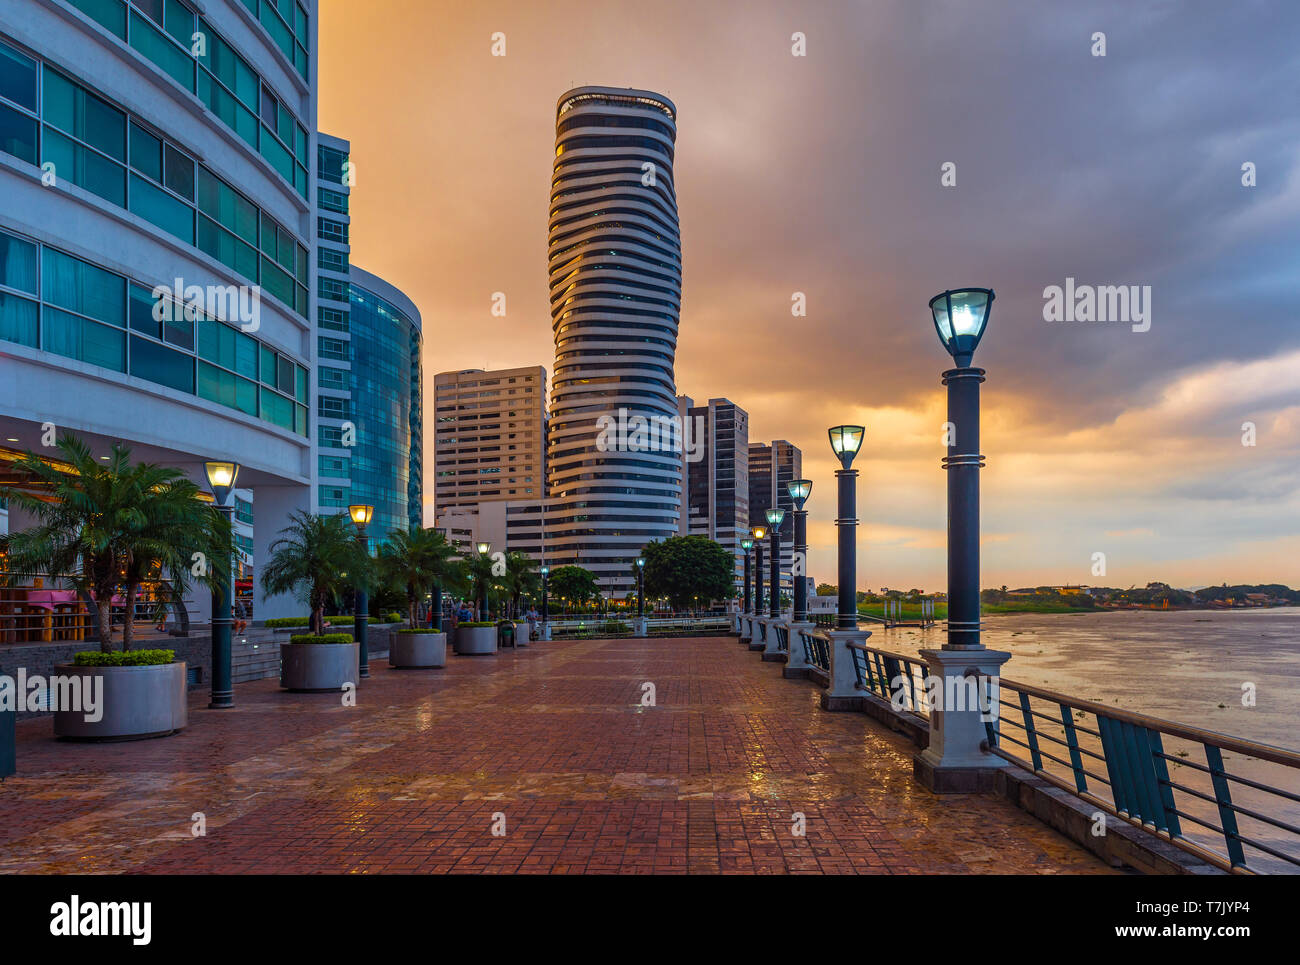 Cityscape of Guayaquil city at sunset with a the Malecon 2000 waterfront, the Guayas river and the point skyscraper after a thunderstorm, Ecuador. Stock Photo